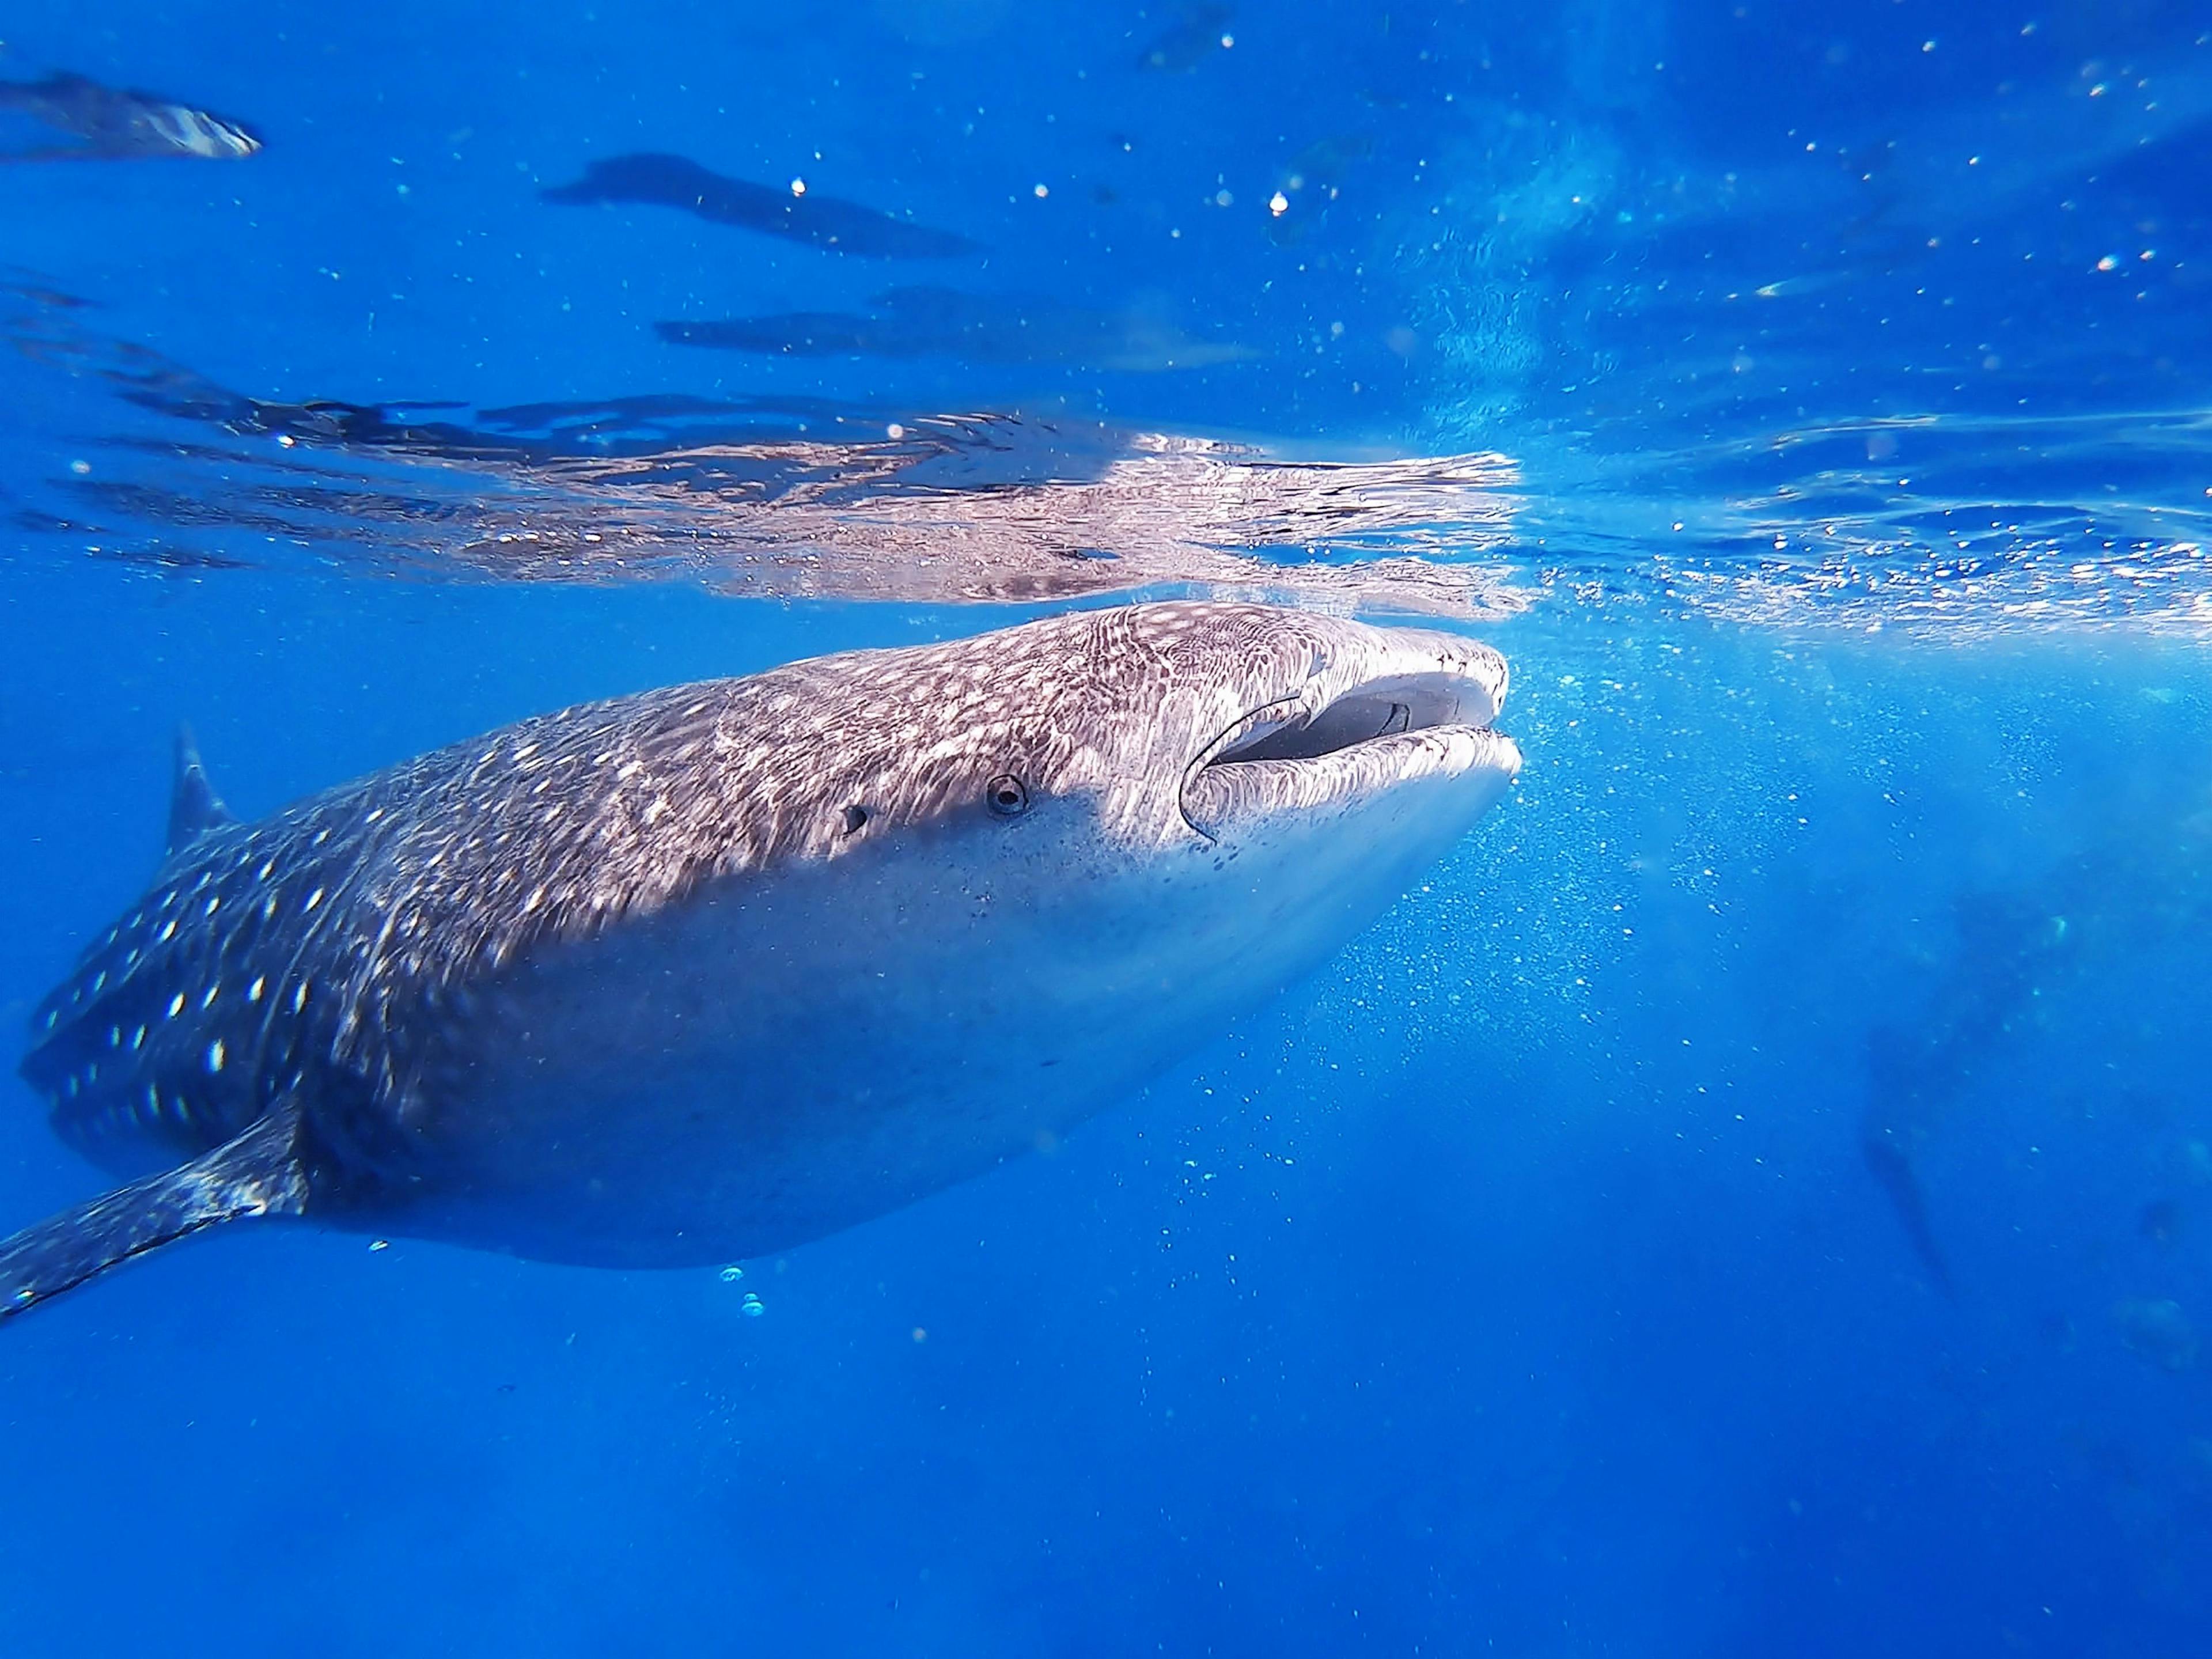 Whale shark swimming under water in Oslob, Philippines.